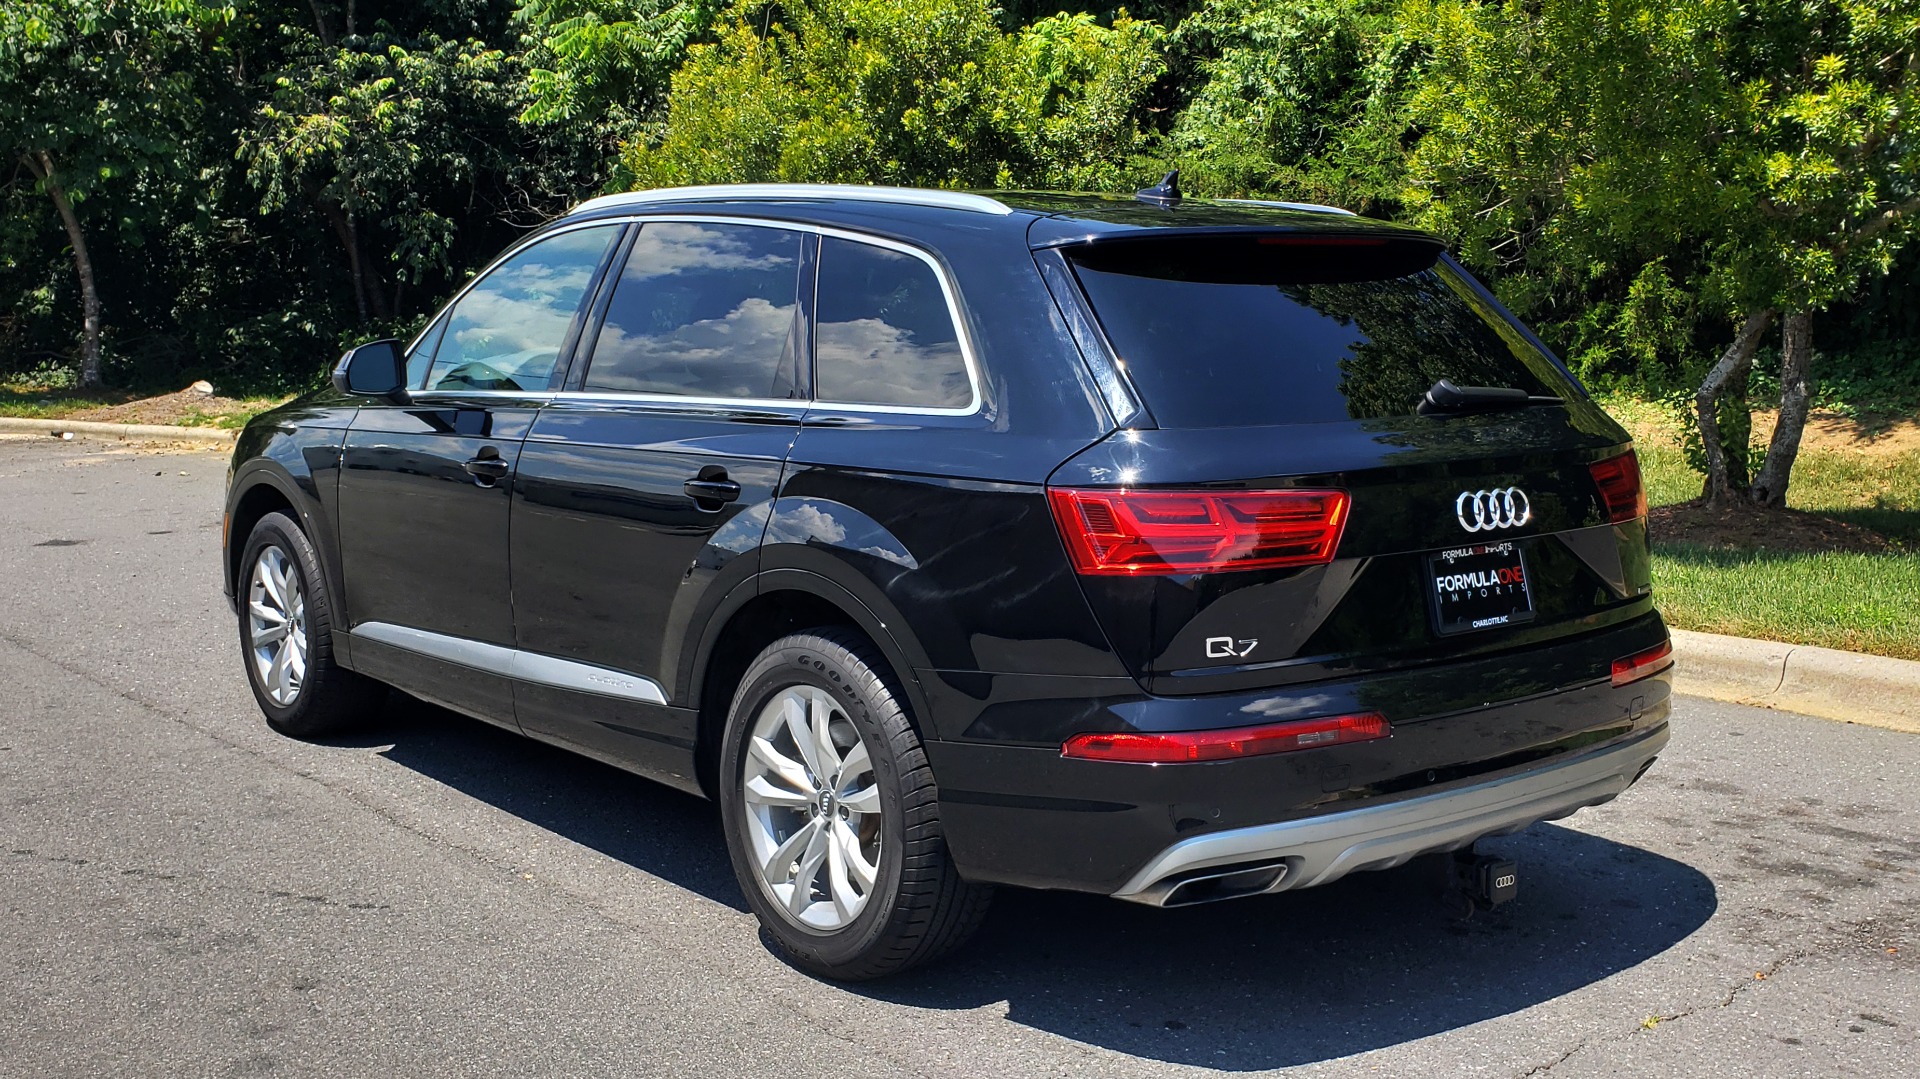 Used 2017 Audi Q7 PREMIUM PLUS / NAV / HTD STS / SUNROOF / REARVIEW / 3-ROW for sale Sold at Formula Imports in Charlotte NC 28227 3